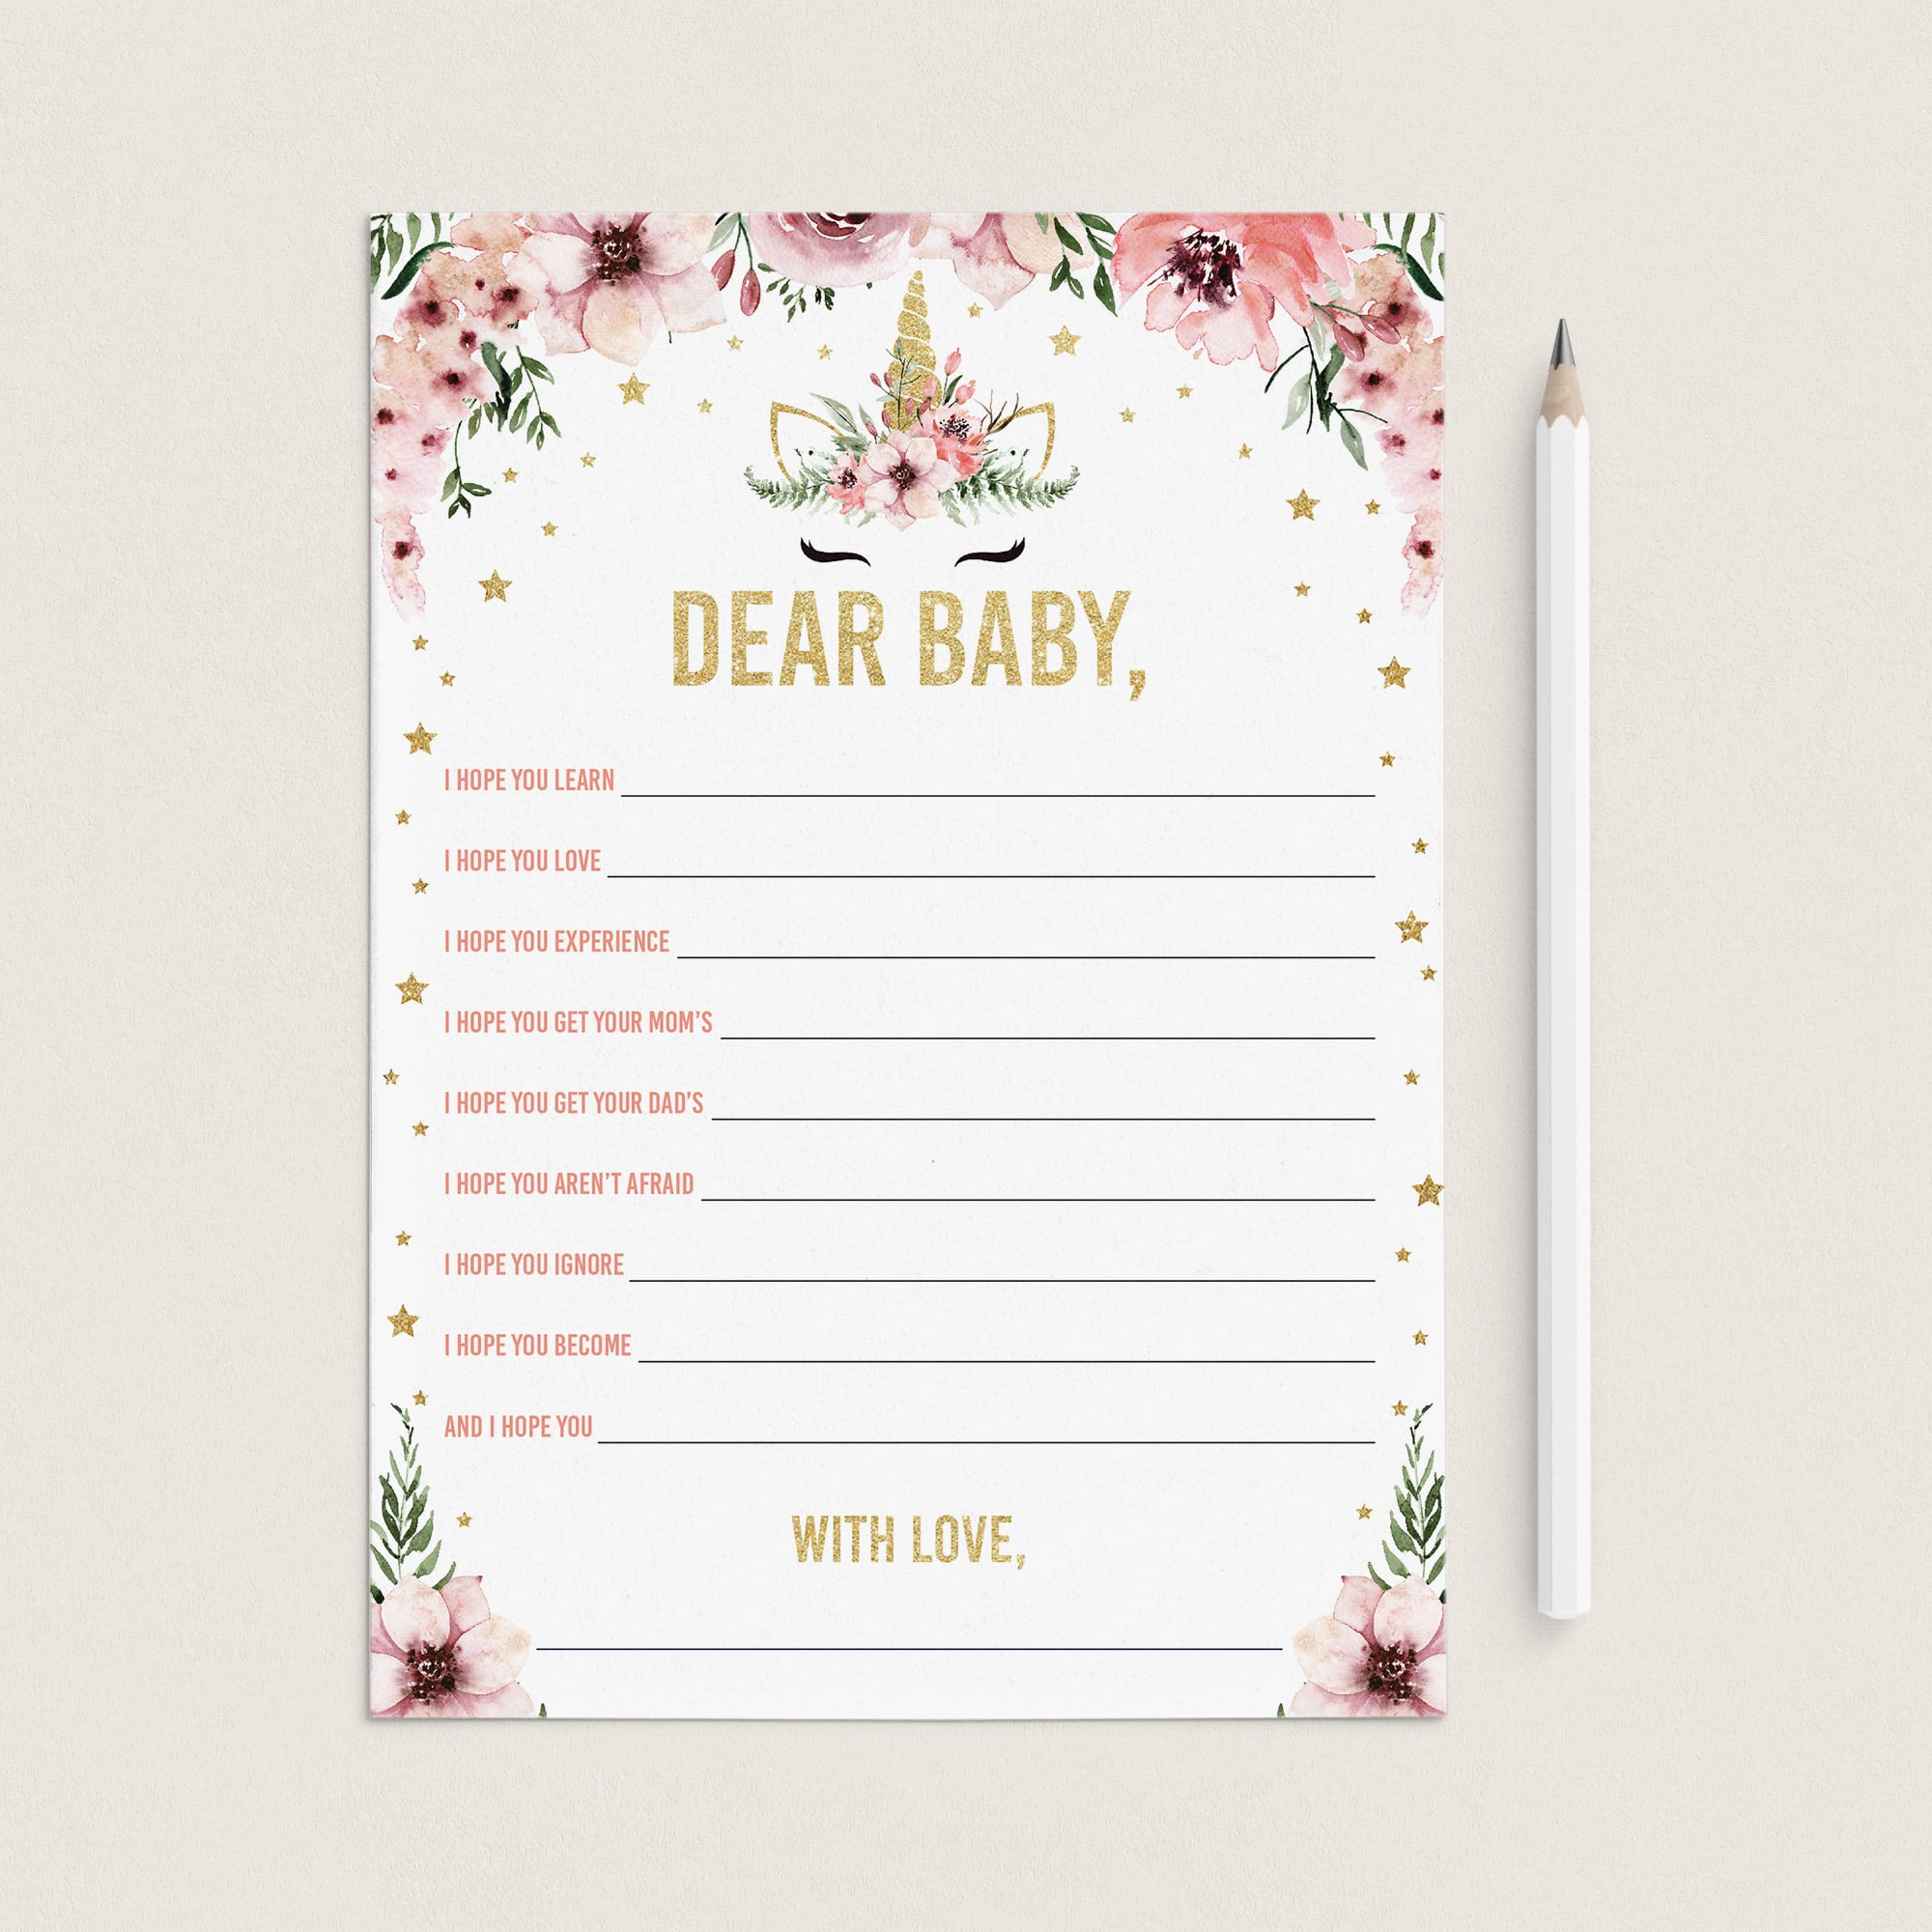 Baby wishes cards for unicorn themed party by LittleSizzle